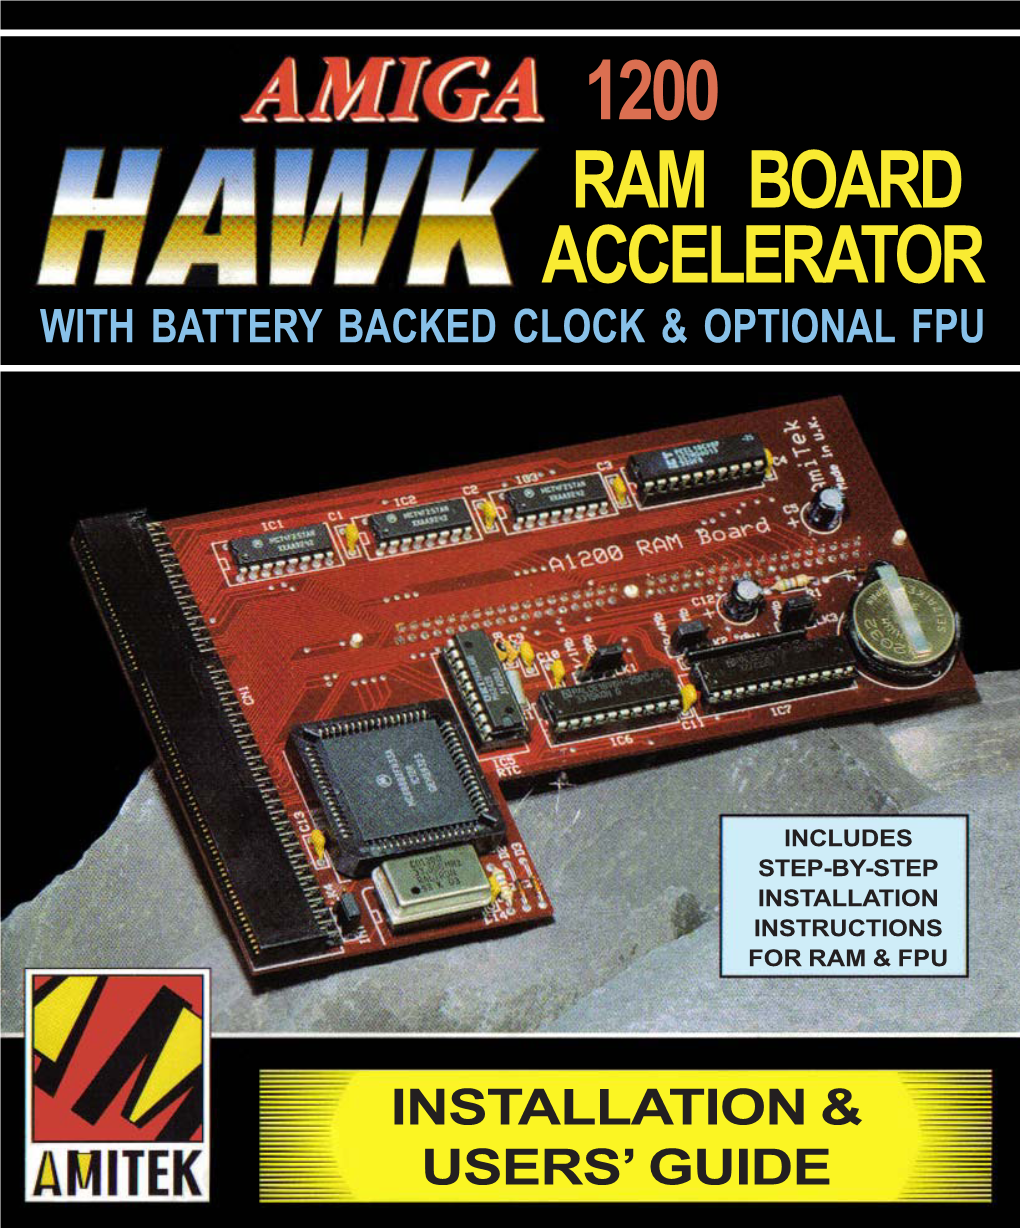 1200 Ram Board Accelerator with Battery Backed Clock & Optional Fpu